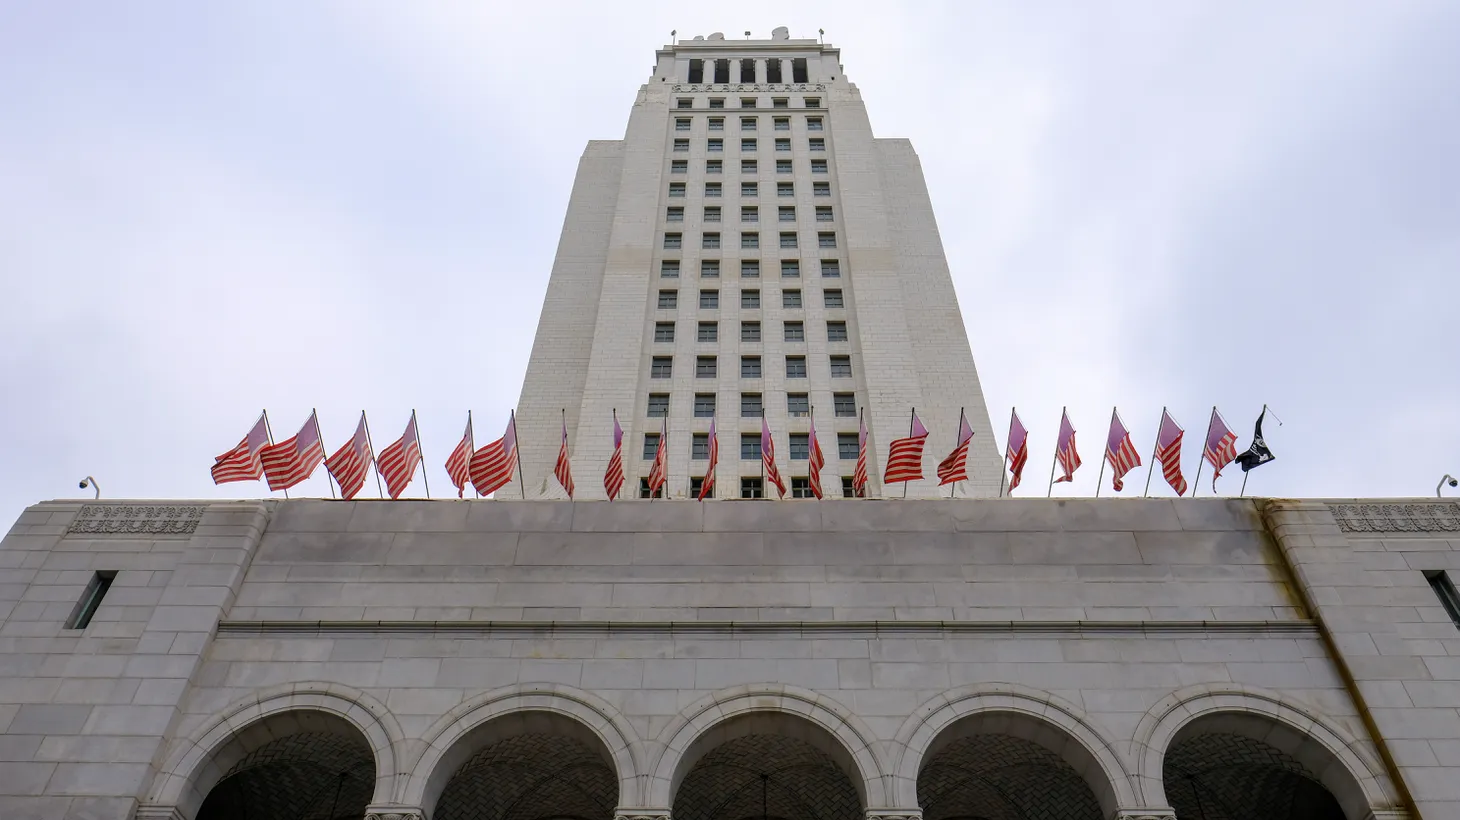 LA City Hall is seen on a cloudy day.